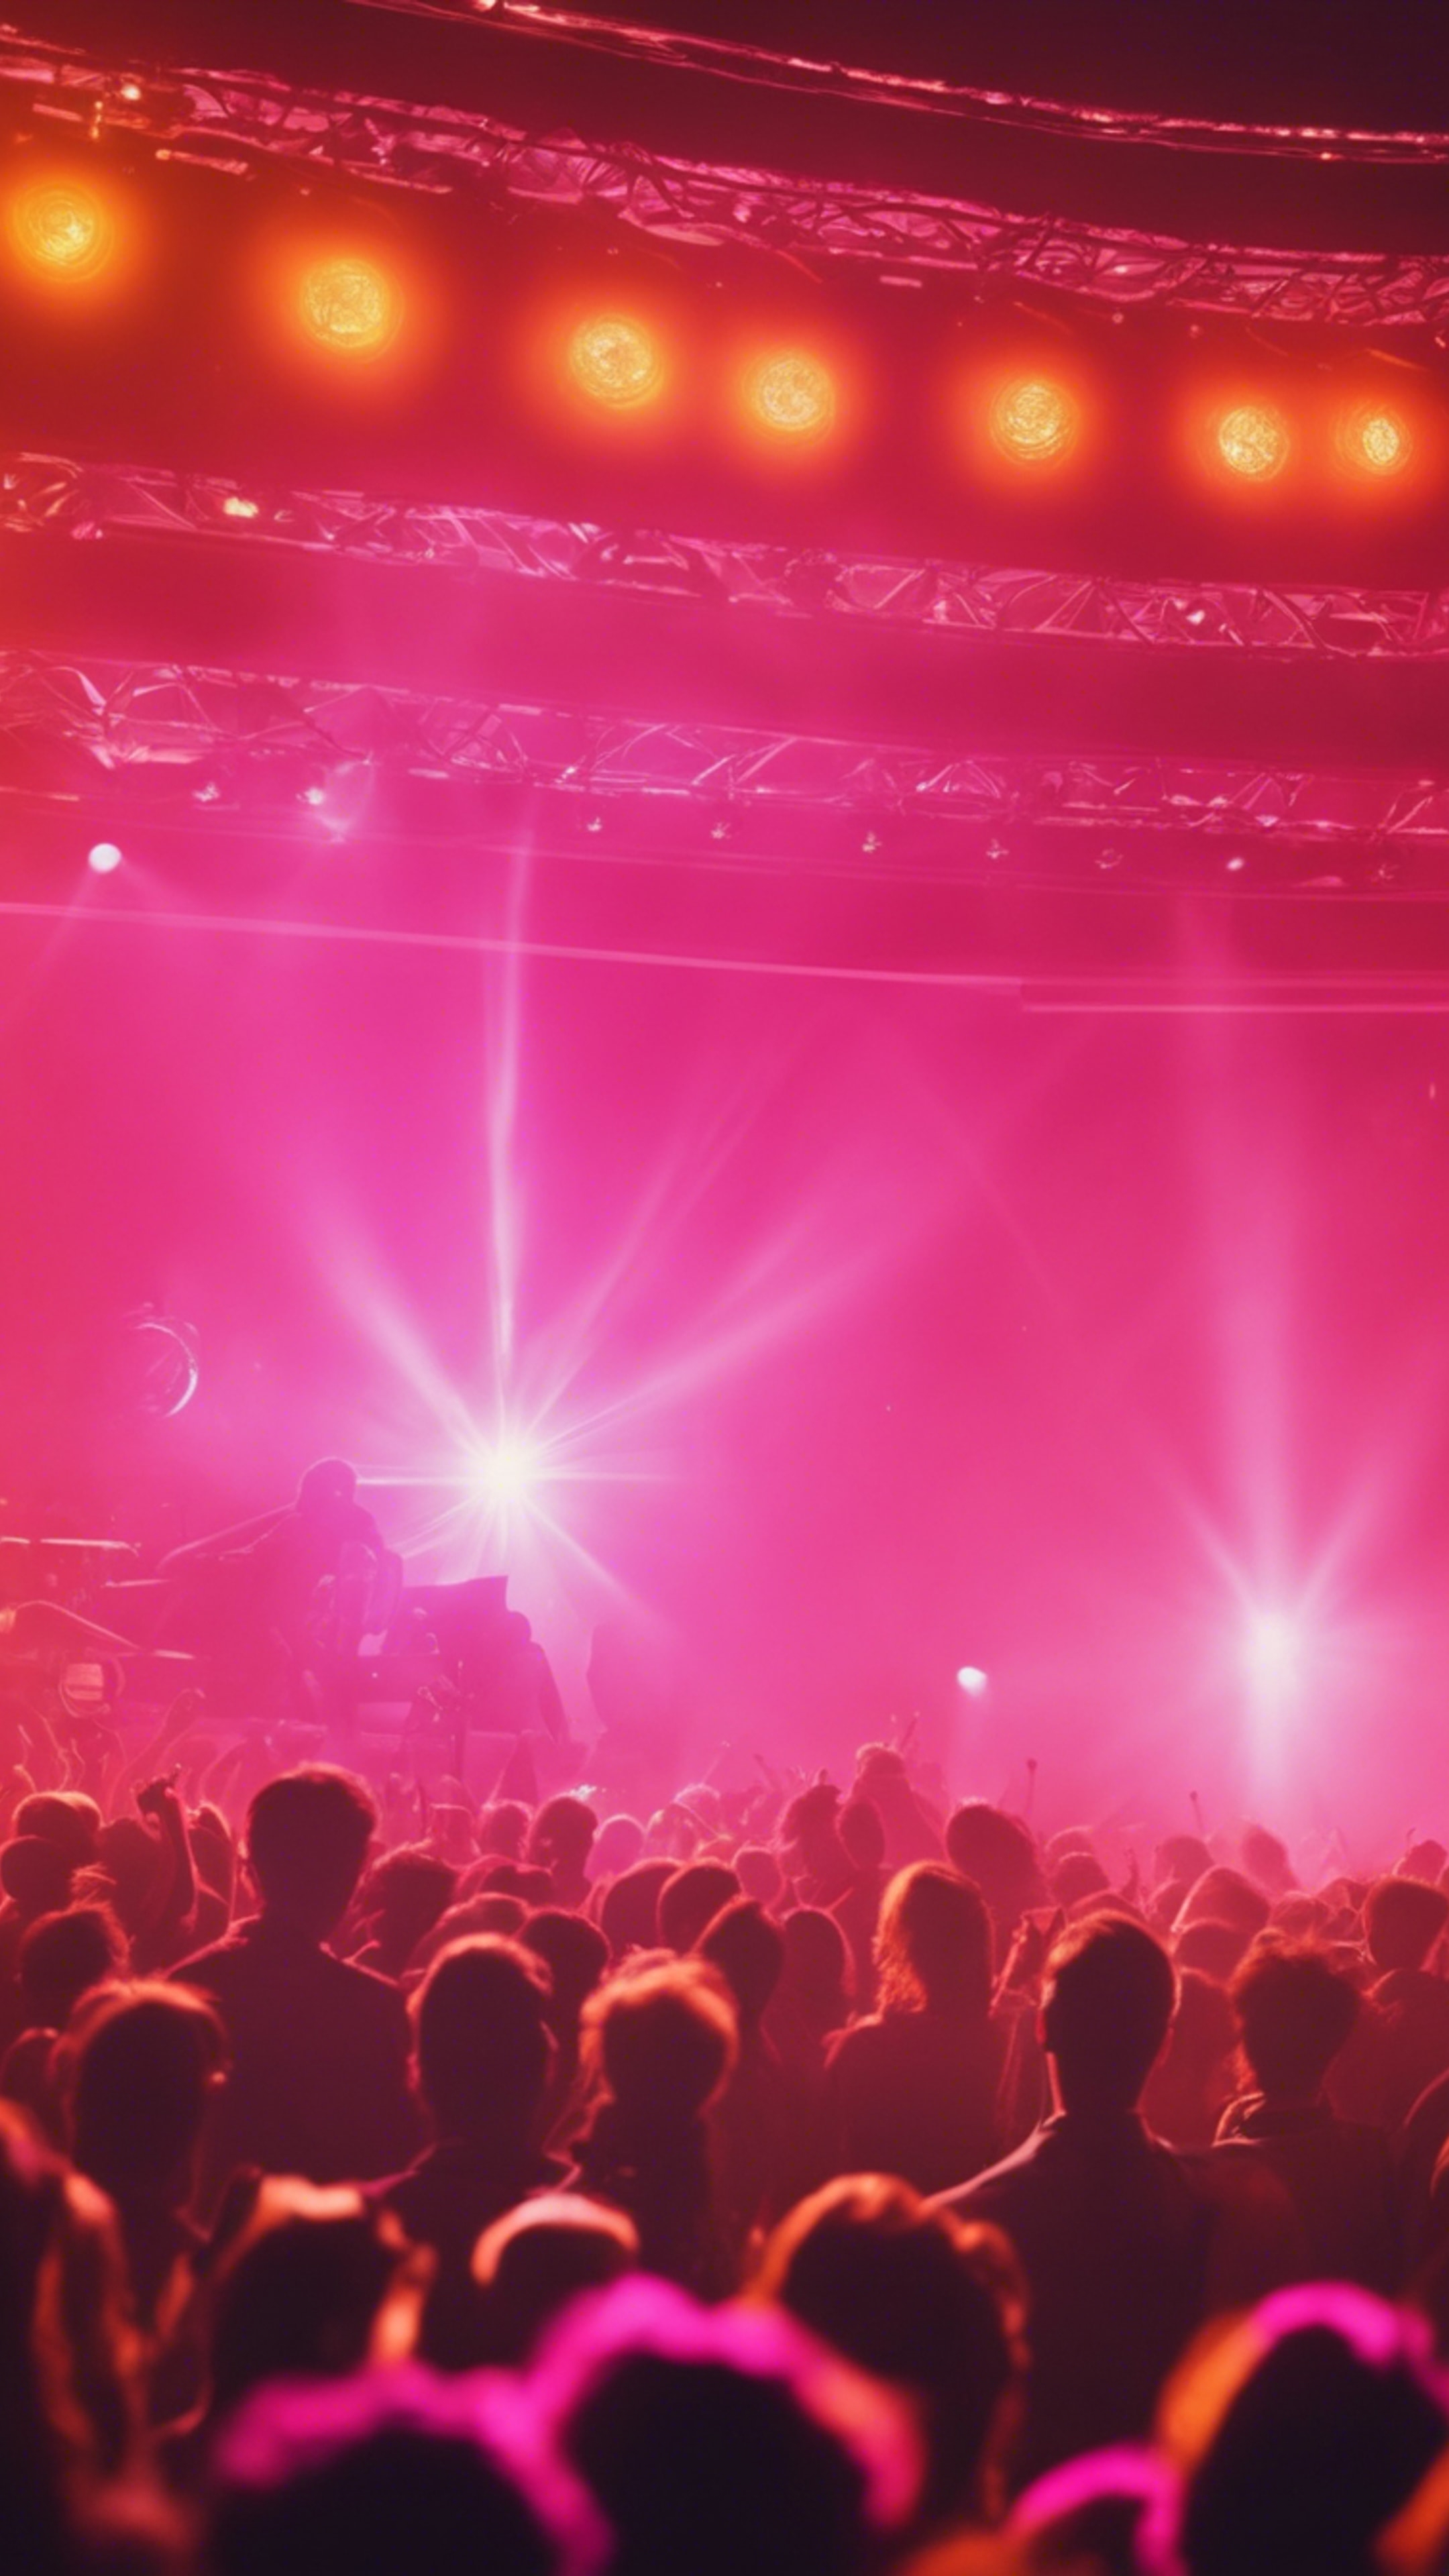 Bright orange flares from an 80s music concert with a pink stage lighting. Tapet[6011018ba8cb439fb9ea]